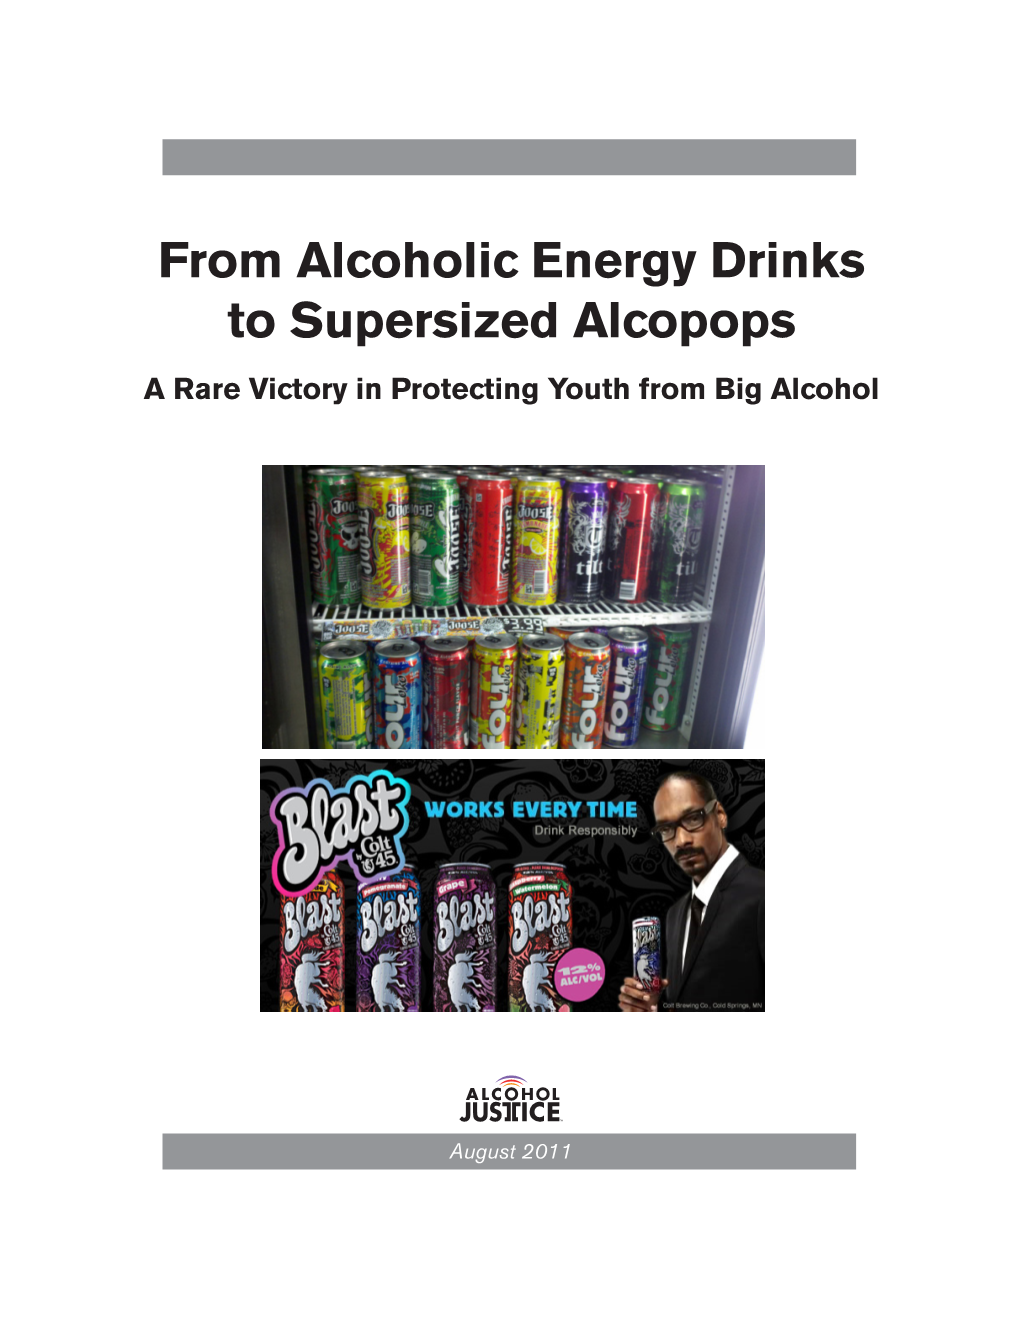 From Alcoholic Energy Drinks to Supersized Alcopops a Rare Victory in Protecting Youth from Big Alcohol